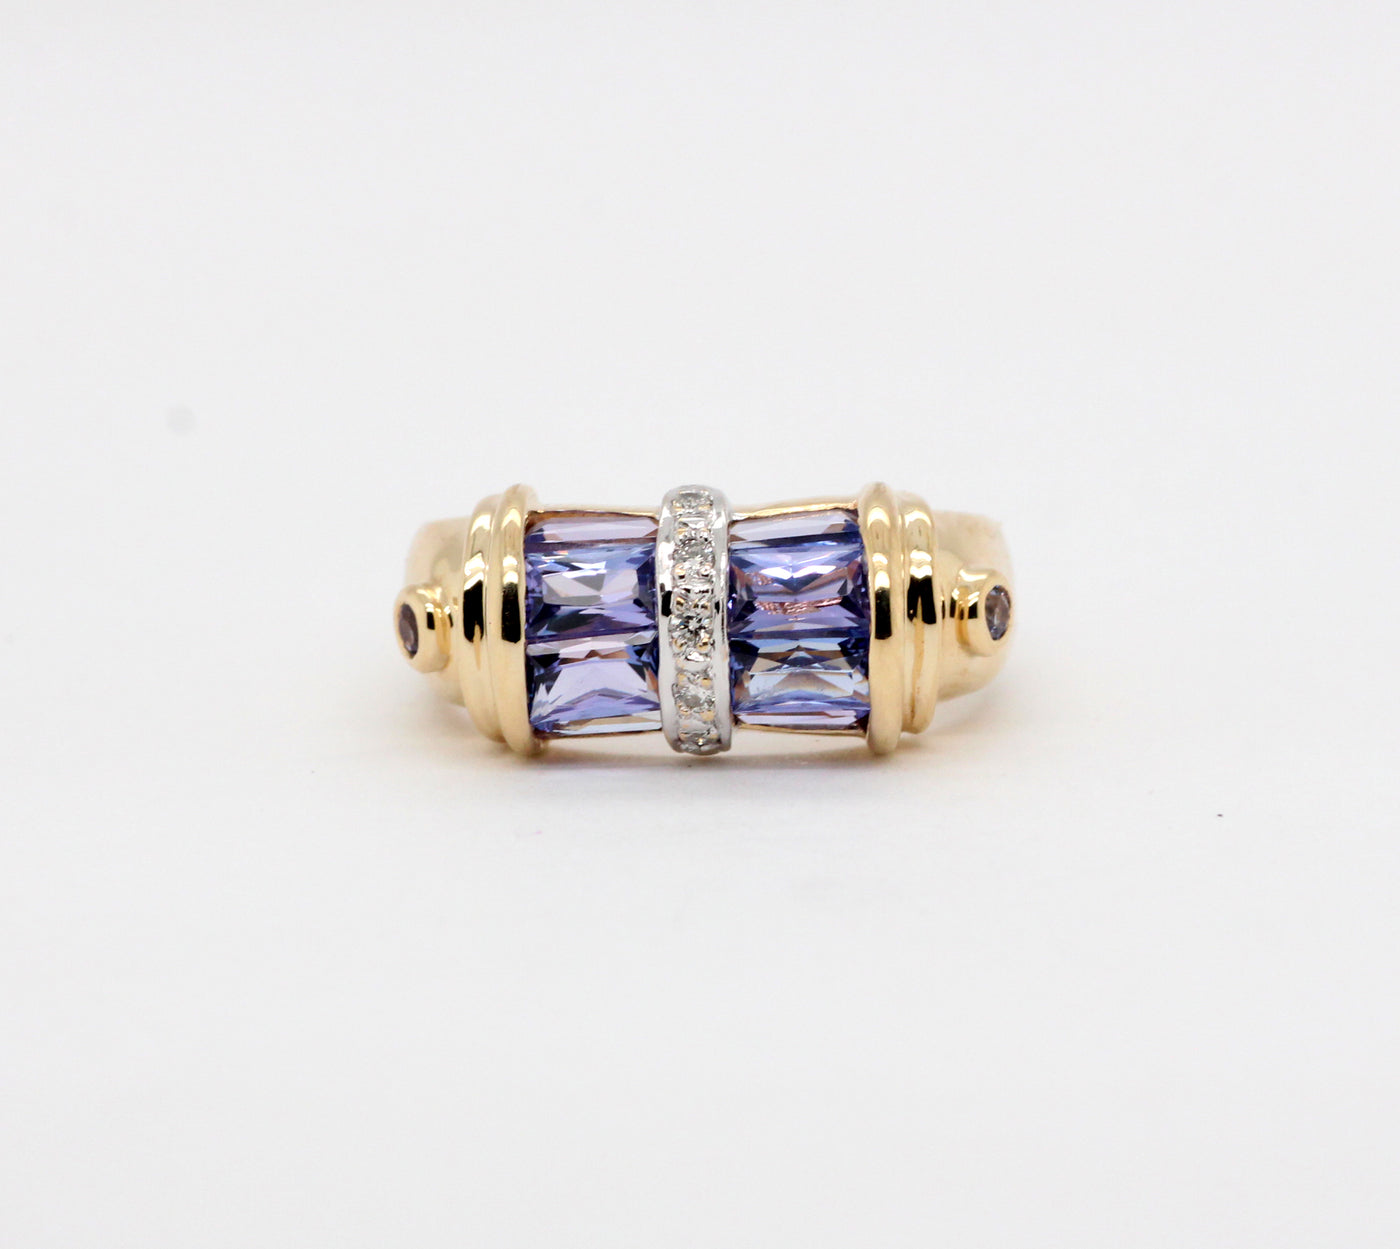 Estate 14ky 1.64 cttw iolite and diamond ring, .04 cttw